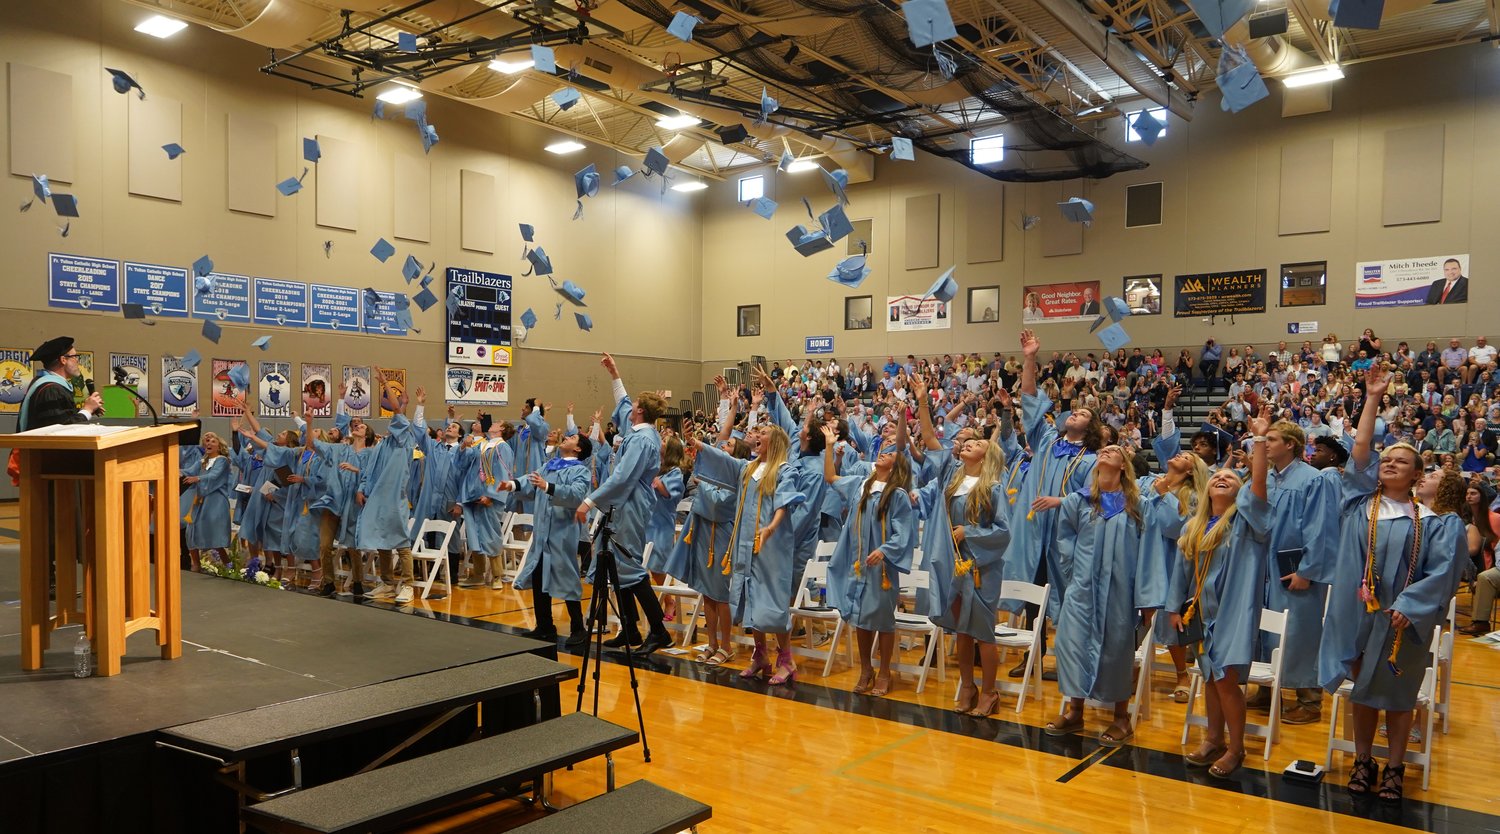 The members of Fr. Tolton Regional Catholic High School’s Class of 2022 toss their mortarboards into the air at the end of their graduation ceremony on May 15 in Columbia.